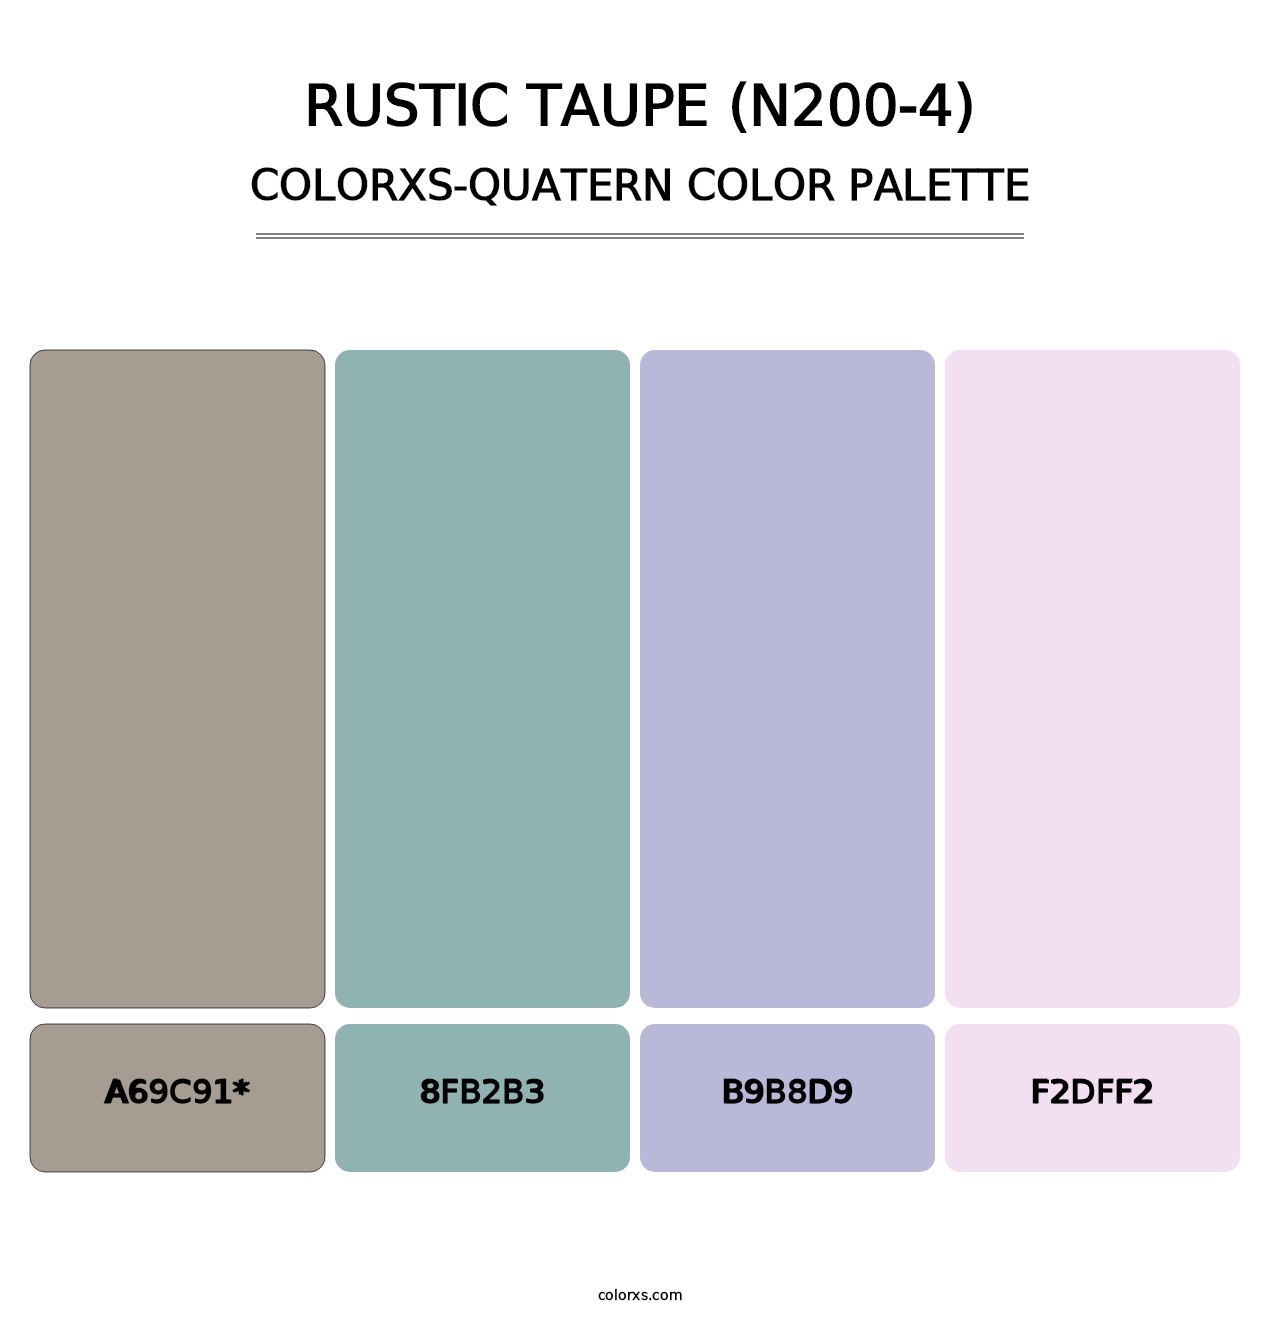 Rustic Taupe (N200-4) - Colorxs Quatern Palette